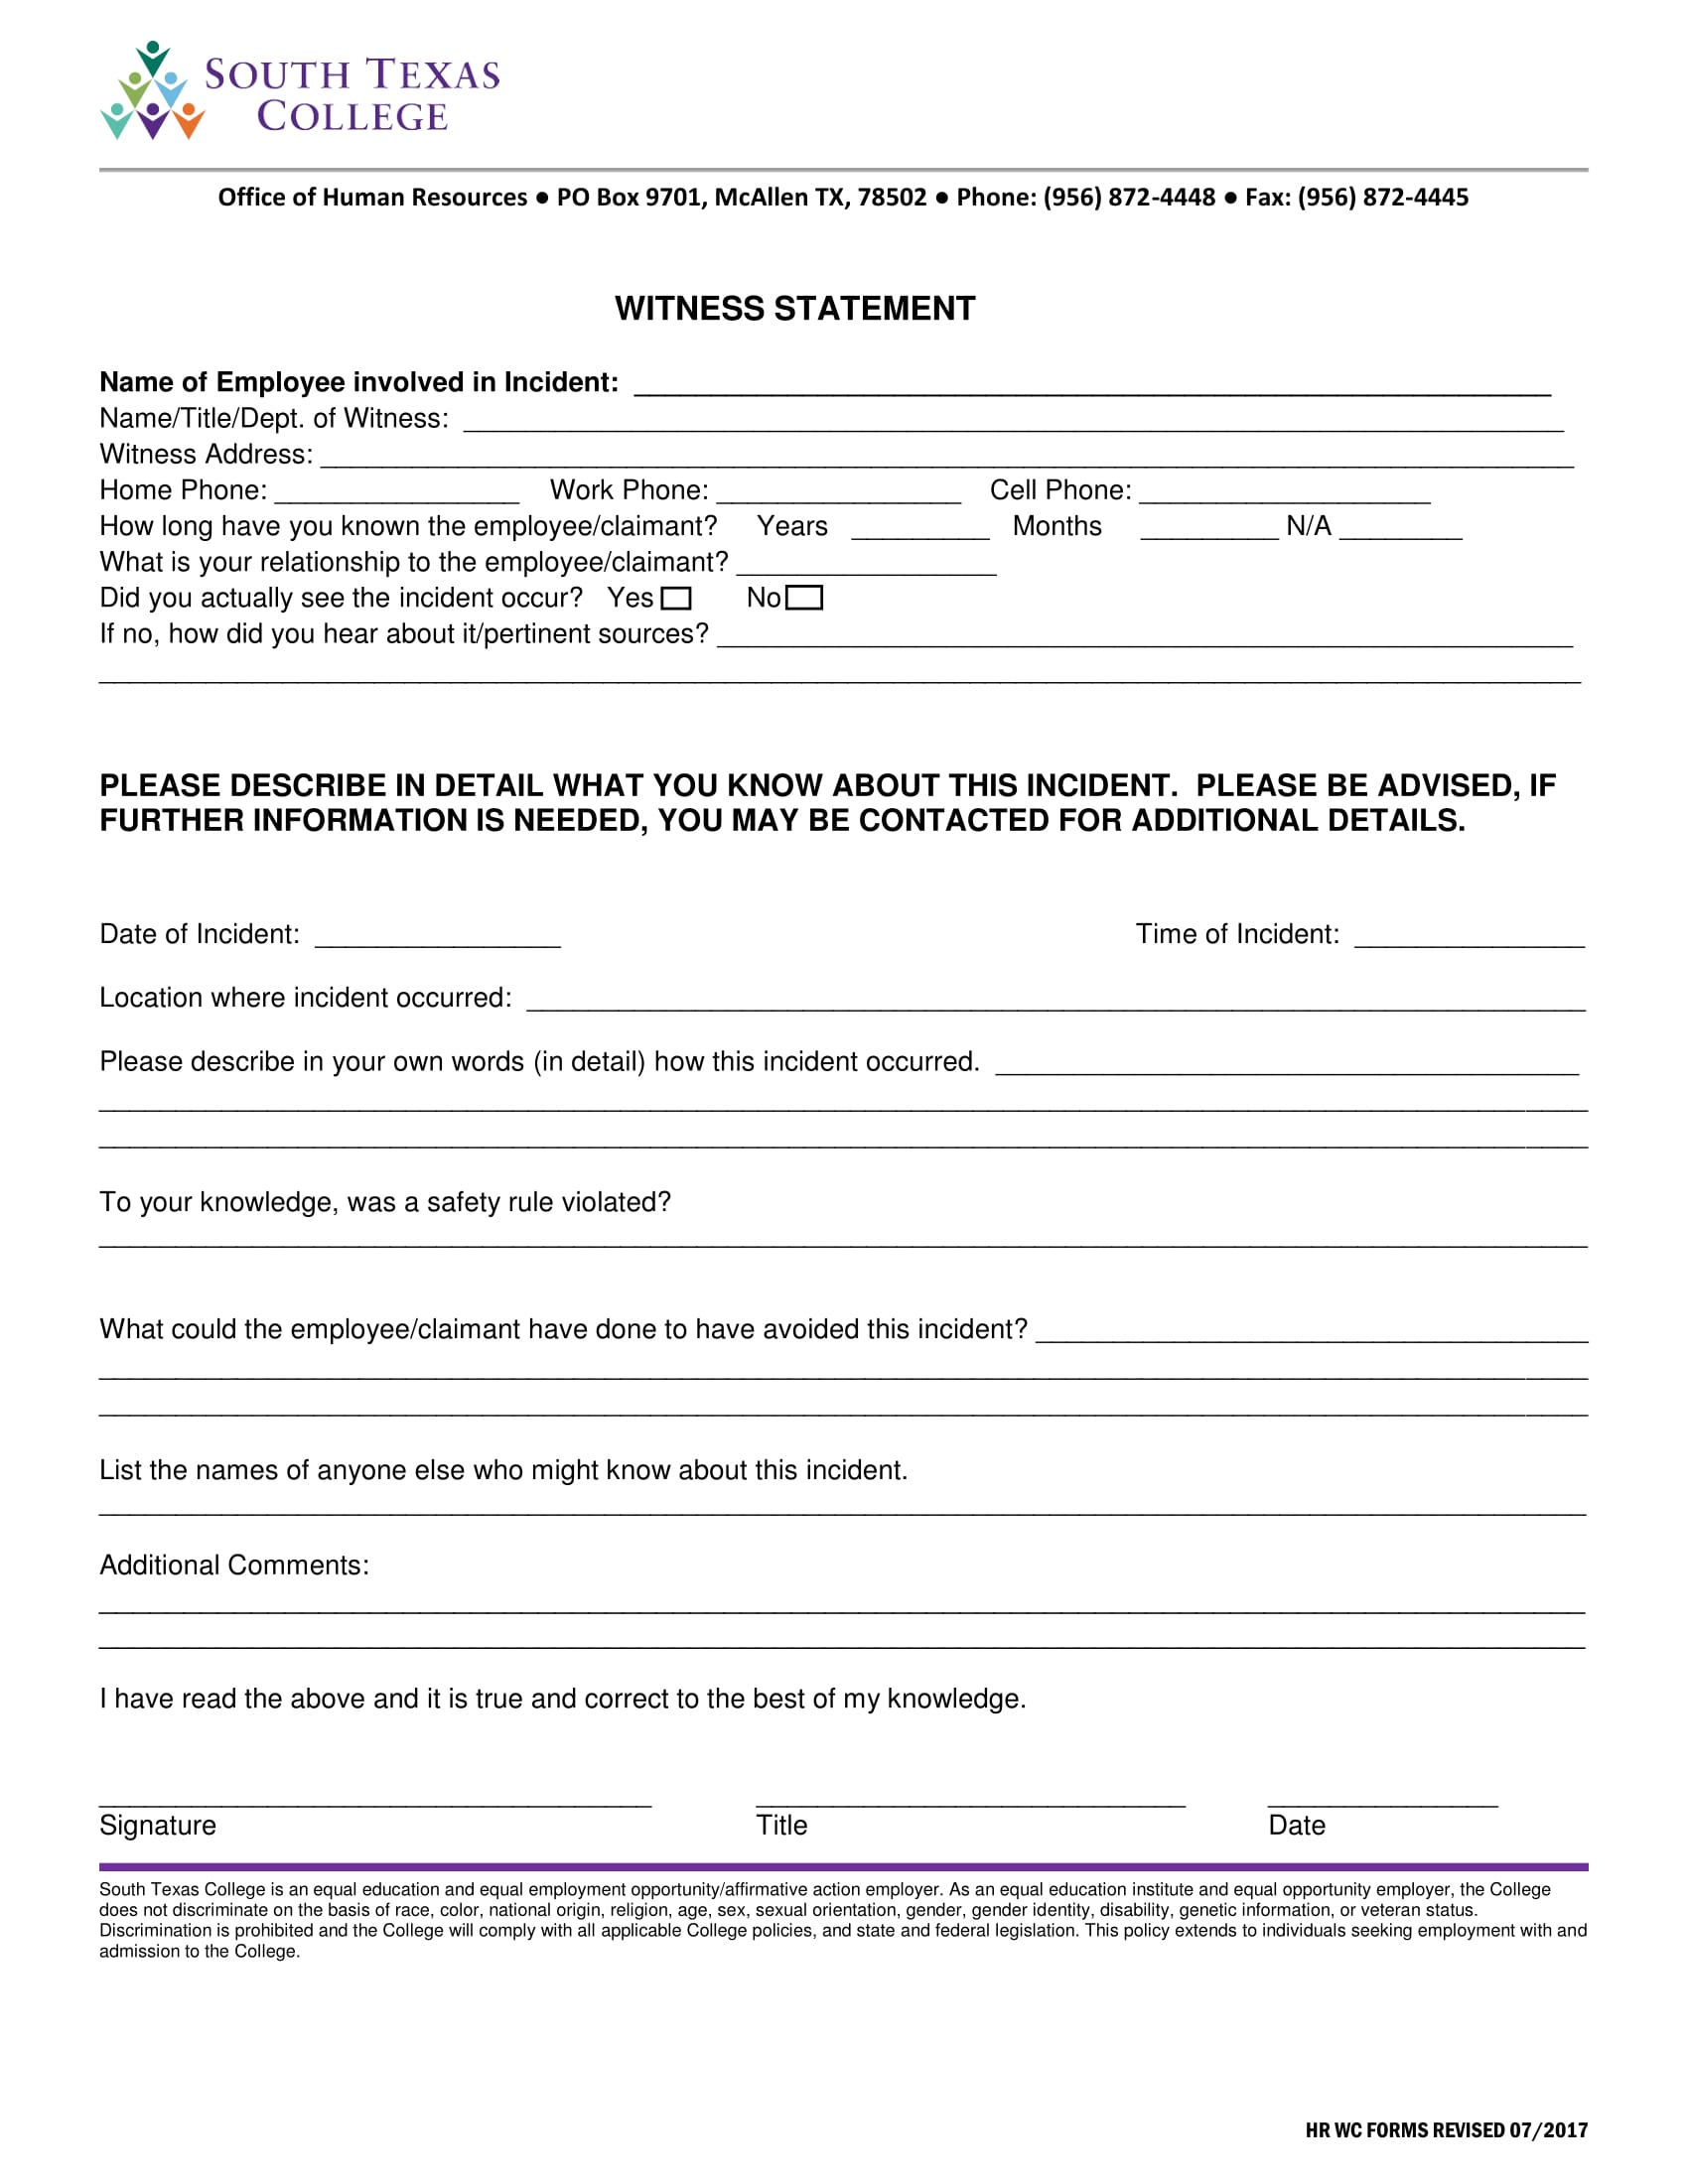 FREE 5+ Employee Witness Statement Forms in MS Word  PDF